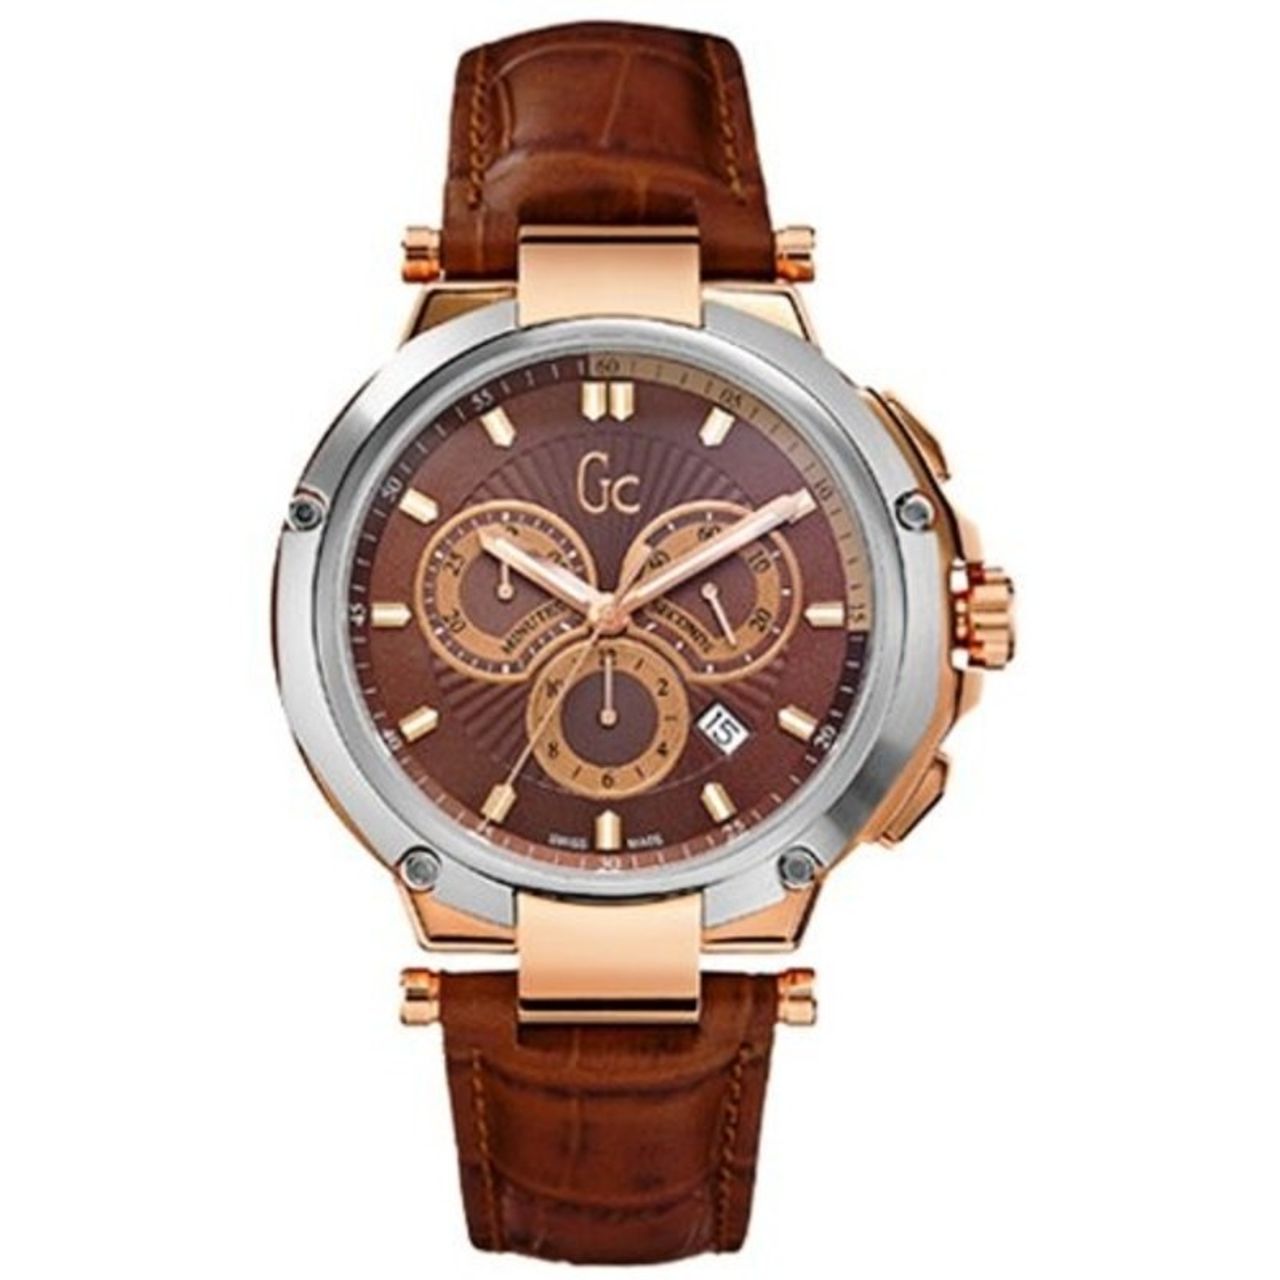 Guess X66002G4S Mens Brown Dial Watch with Leather Strap